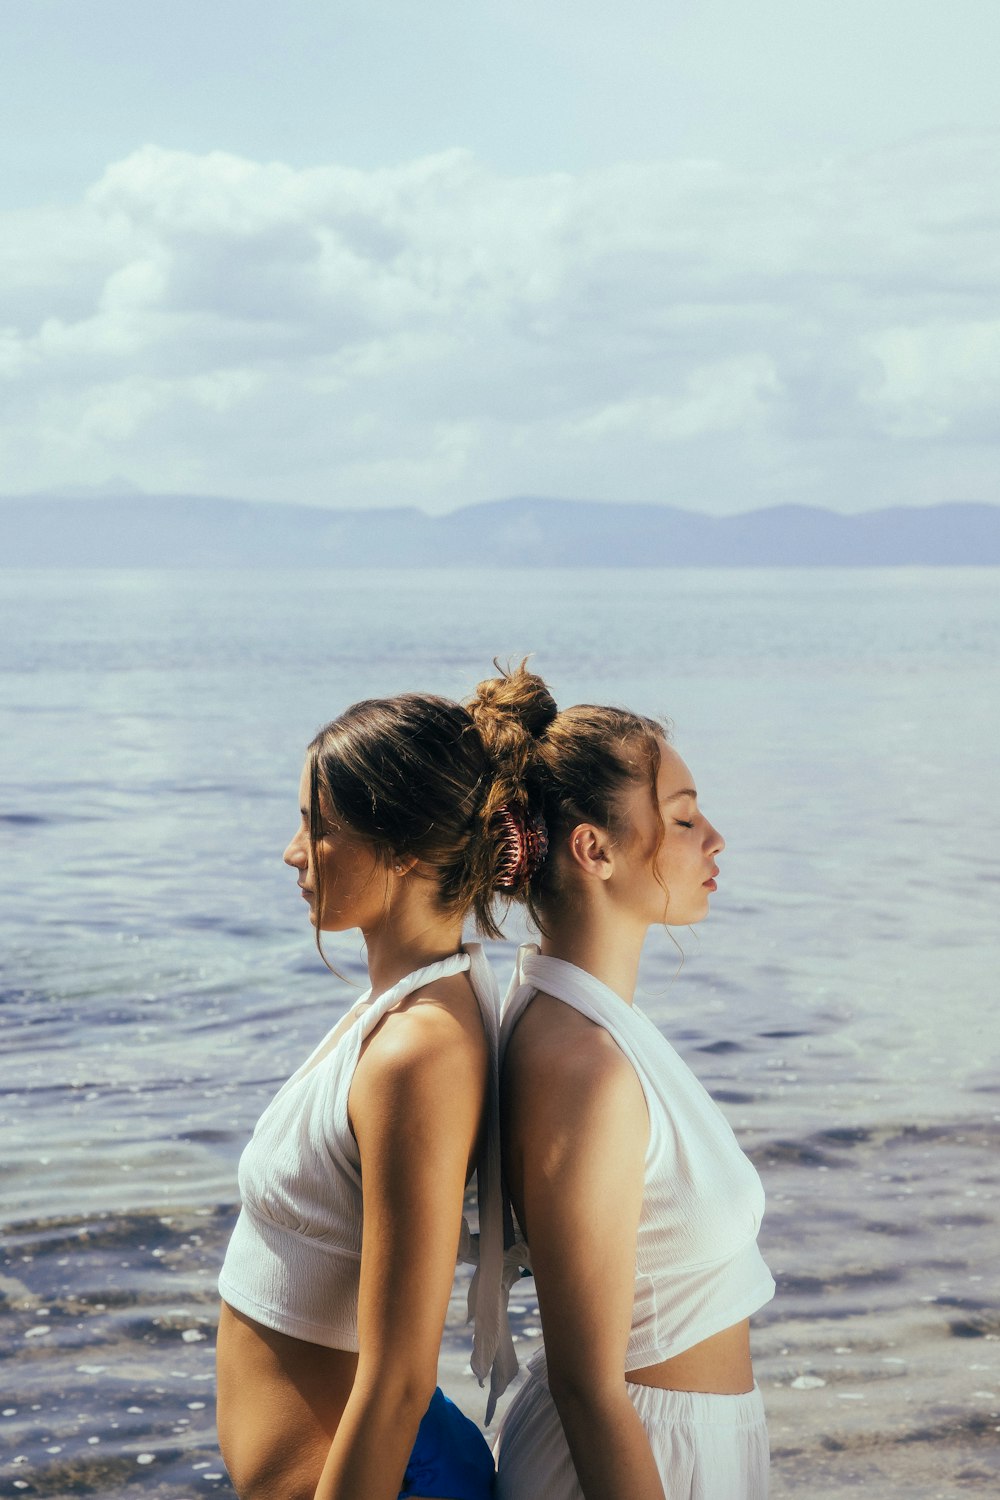 two women standing on a beach next to the ocean